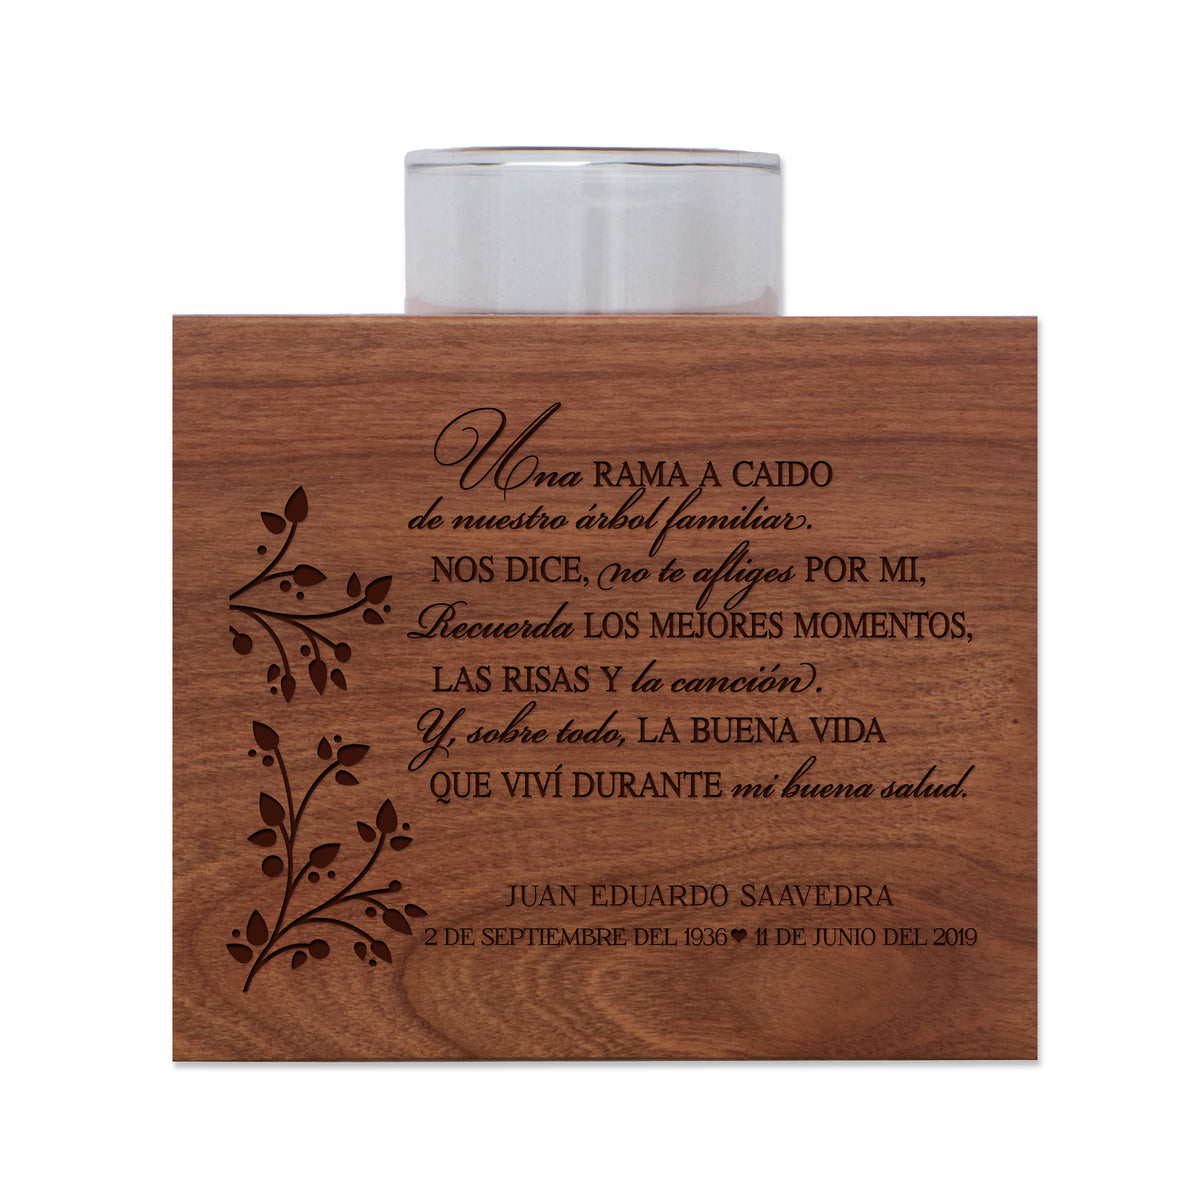 Lifesong Milestones Custom Engraved Cherry Wood Memorial Candle Holder in Spanish Verse 3” (W) x 2.75” (D) x 3.5” (H) Great memorial gift to HONOR the memory of a loved one who has passed on.